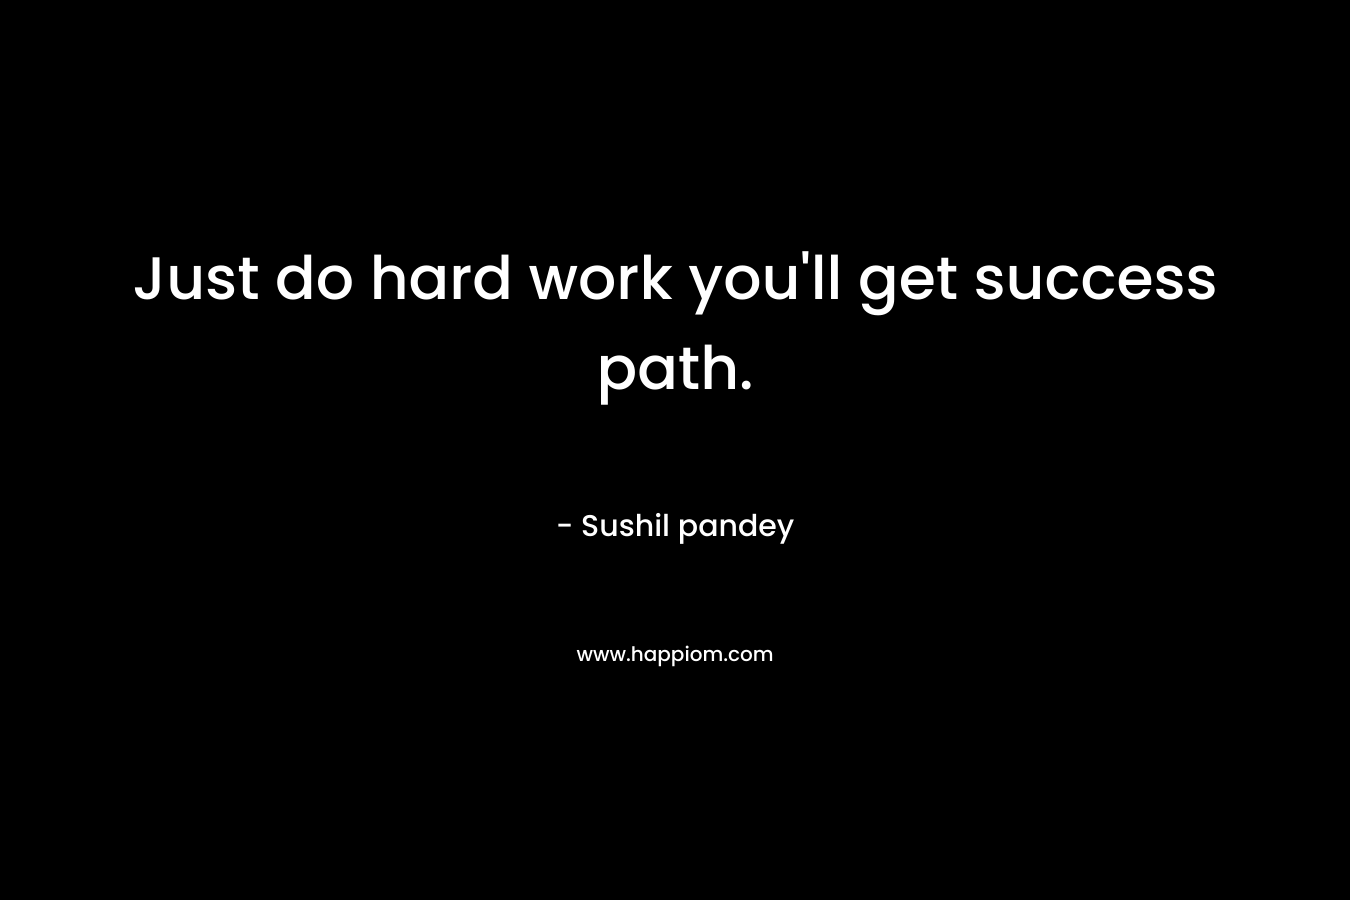 Just do hard work you'll get success path.